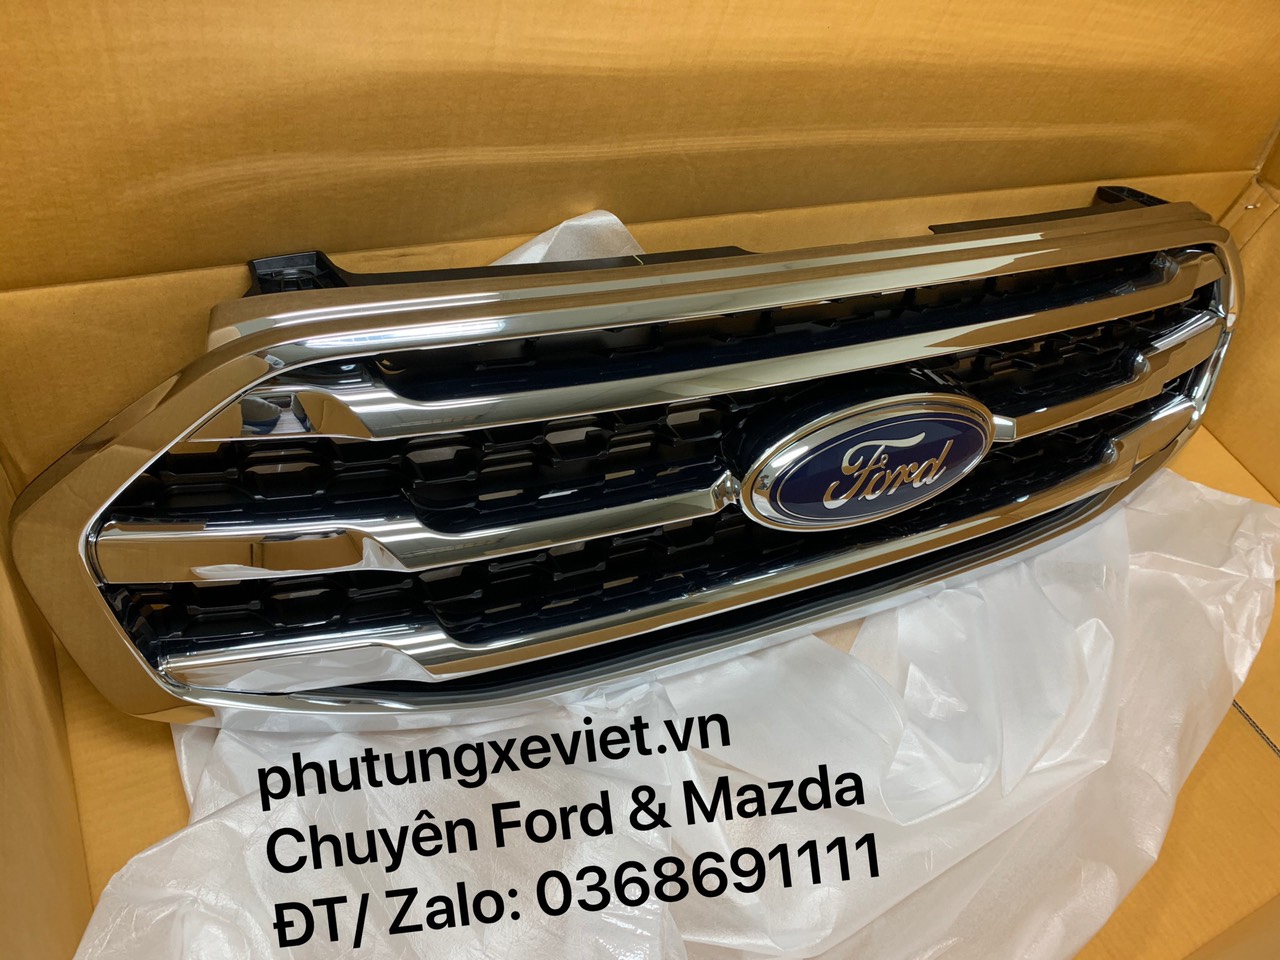 Mặt nạ (ca lăng) Ford Everest 2015-2016-2017-2018-20193